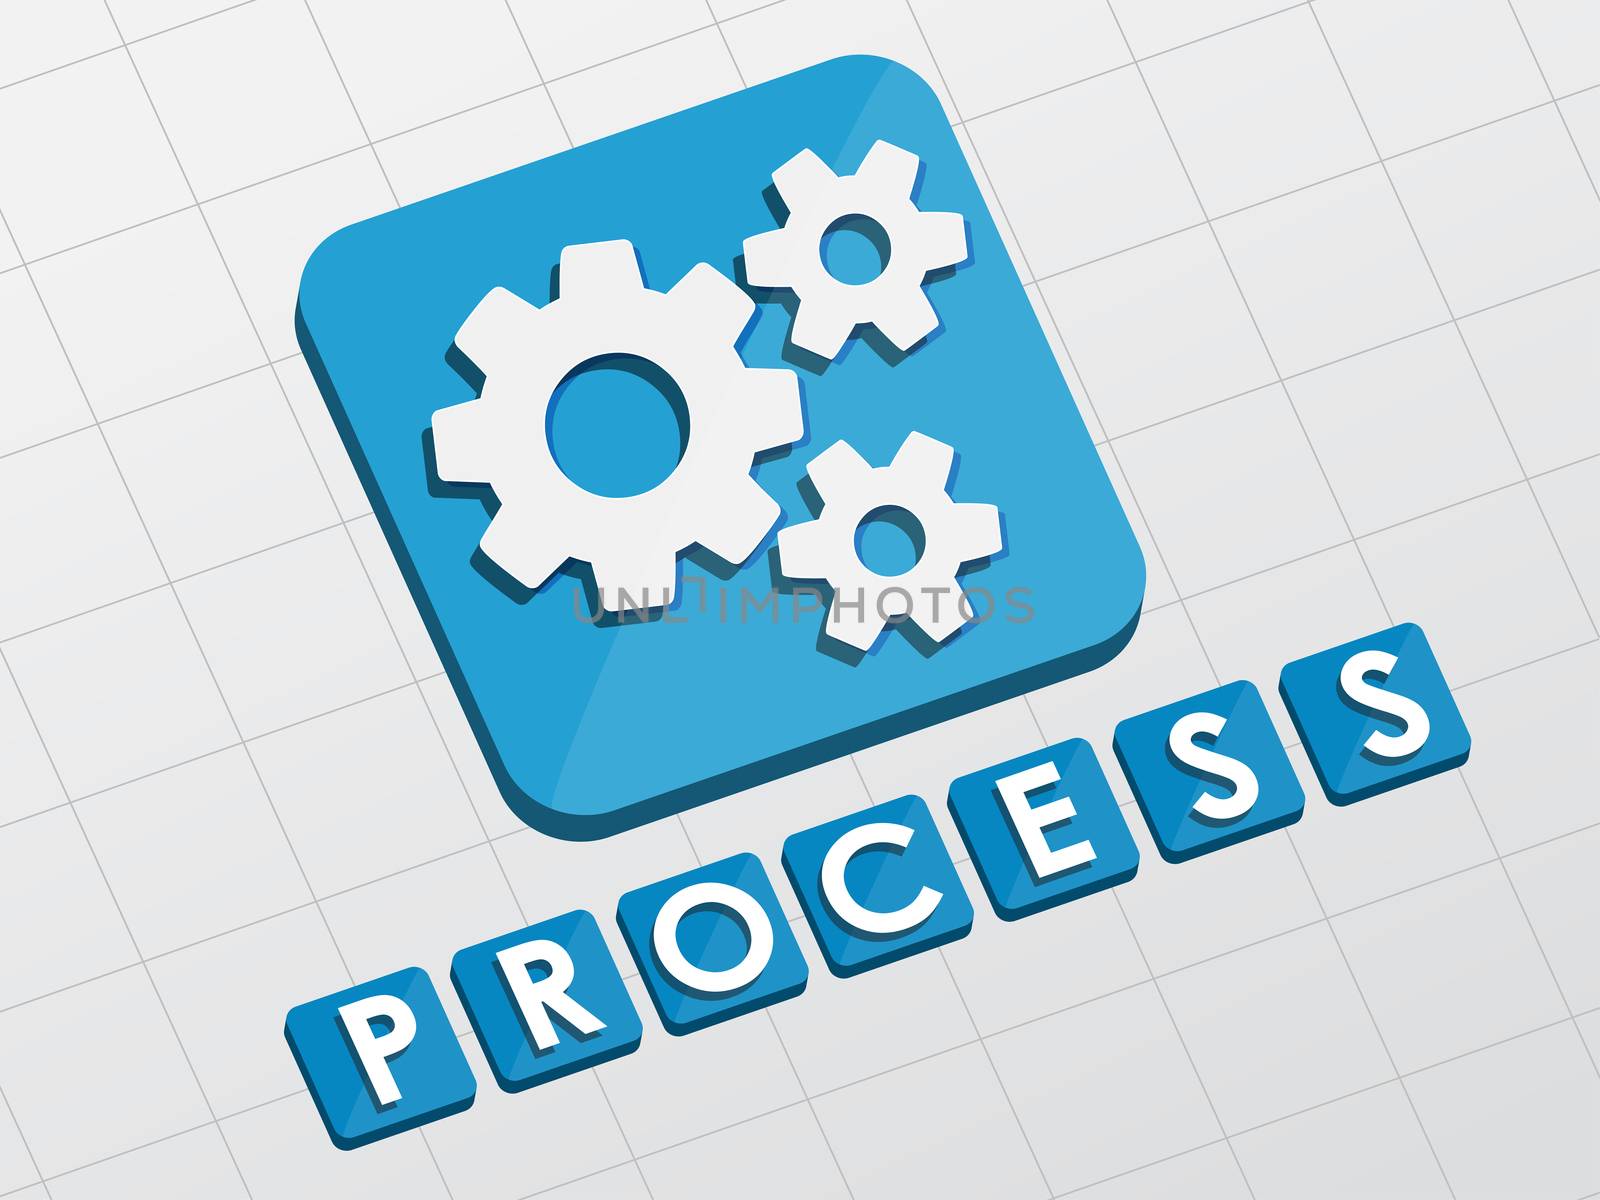 process and gear wheels symbol - text with sign in flat design web icon, business workflow concept